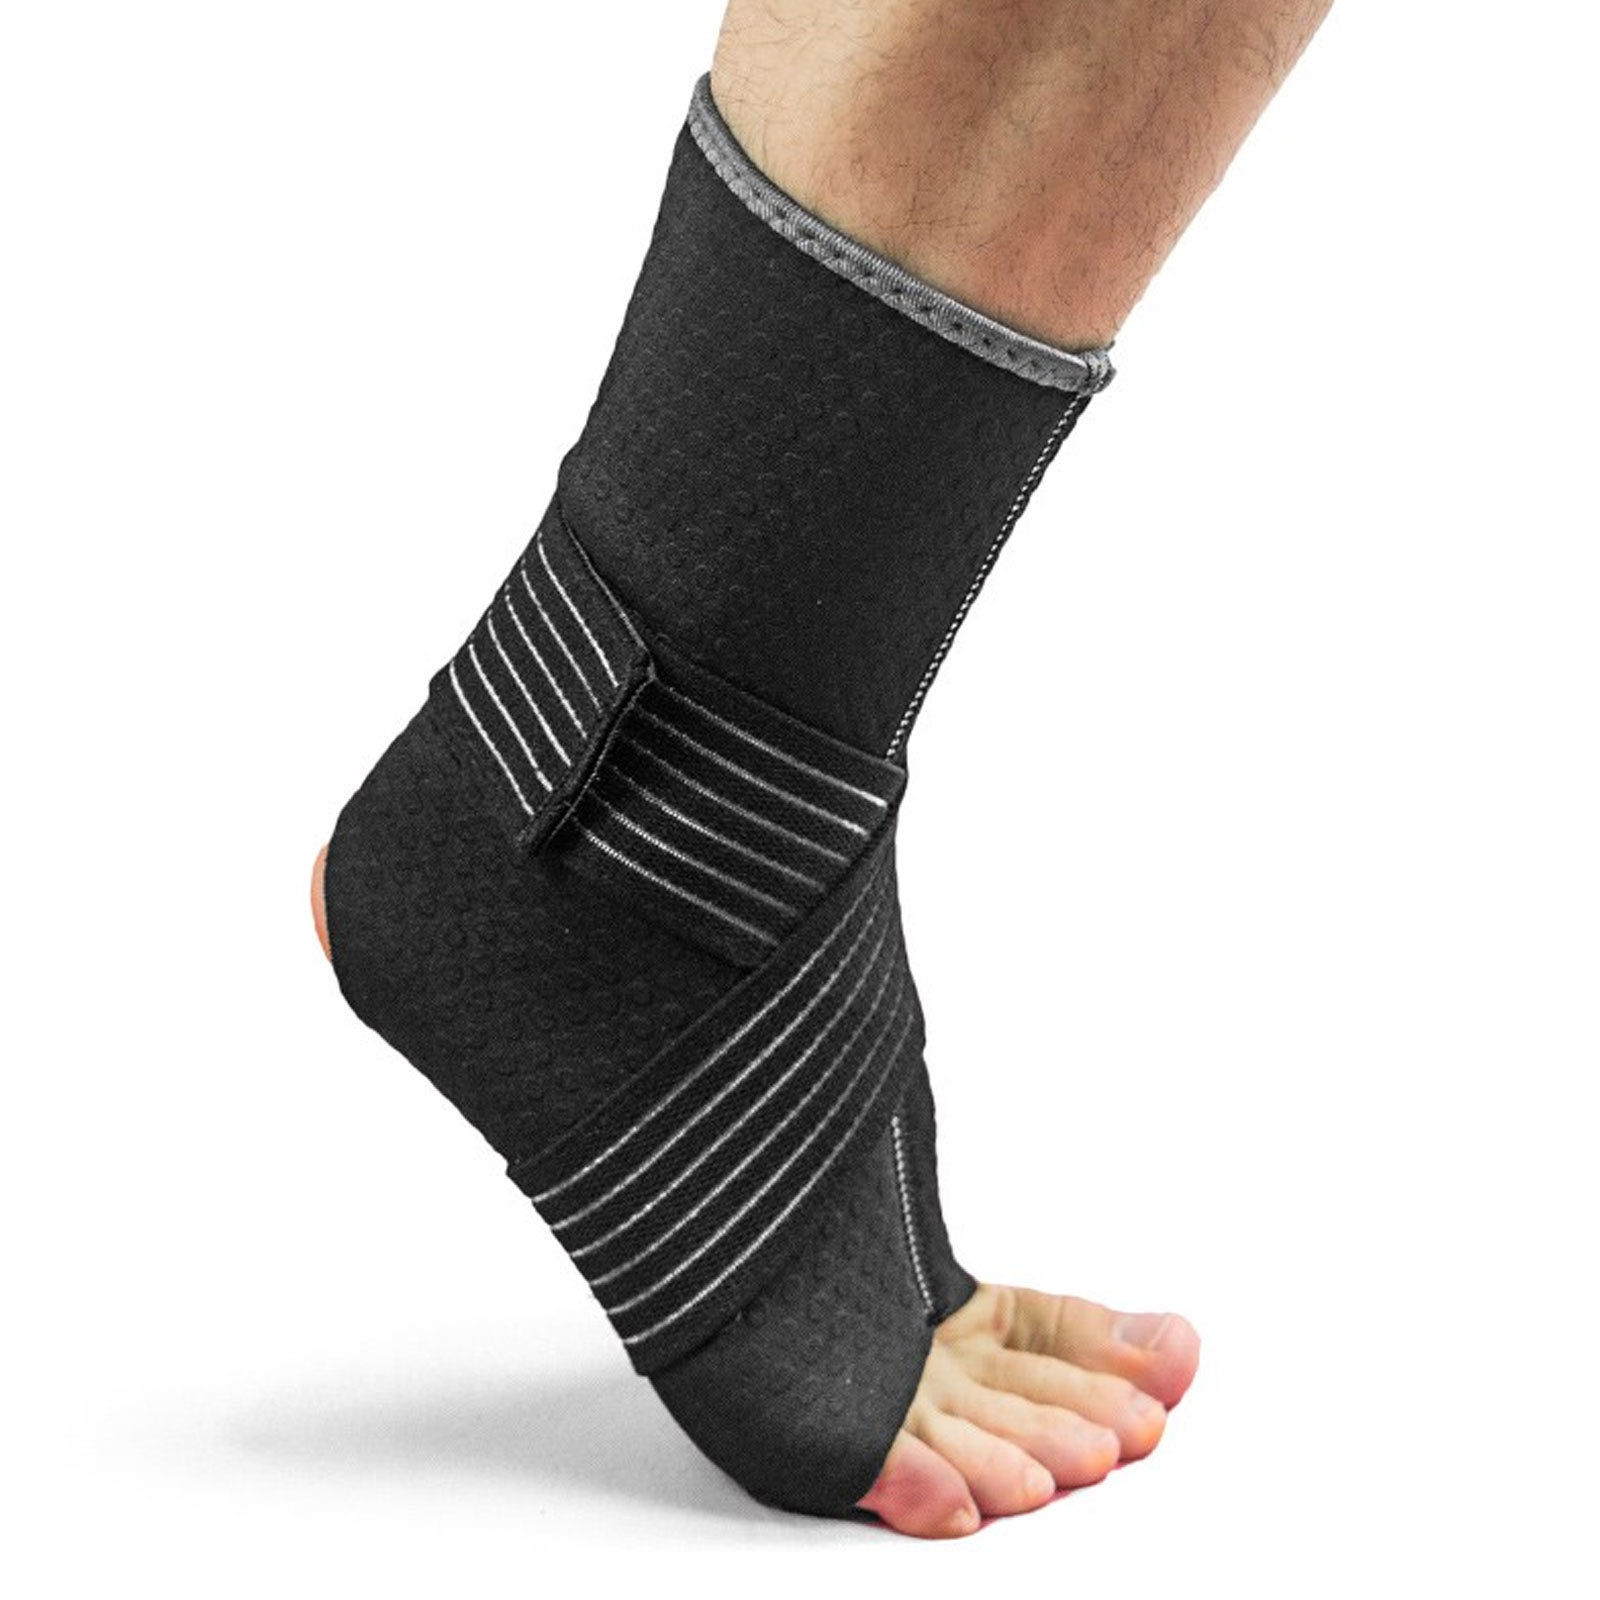 2x Ankle Support Brace Nuova Health